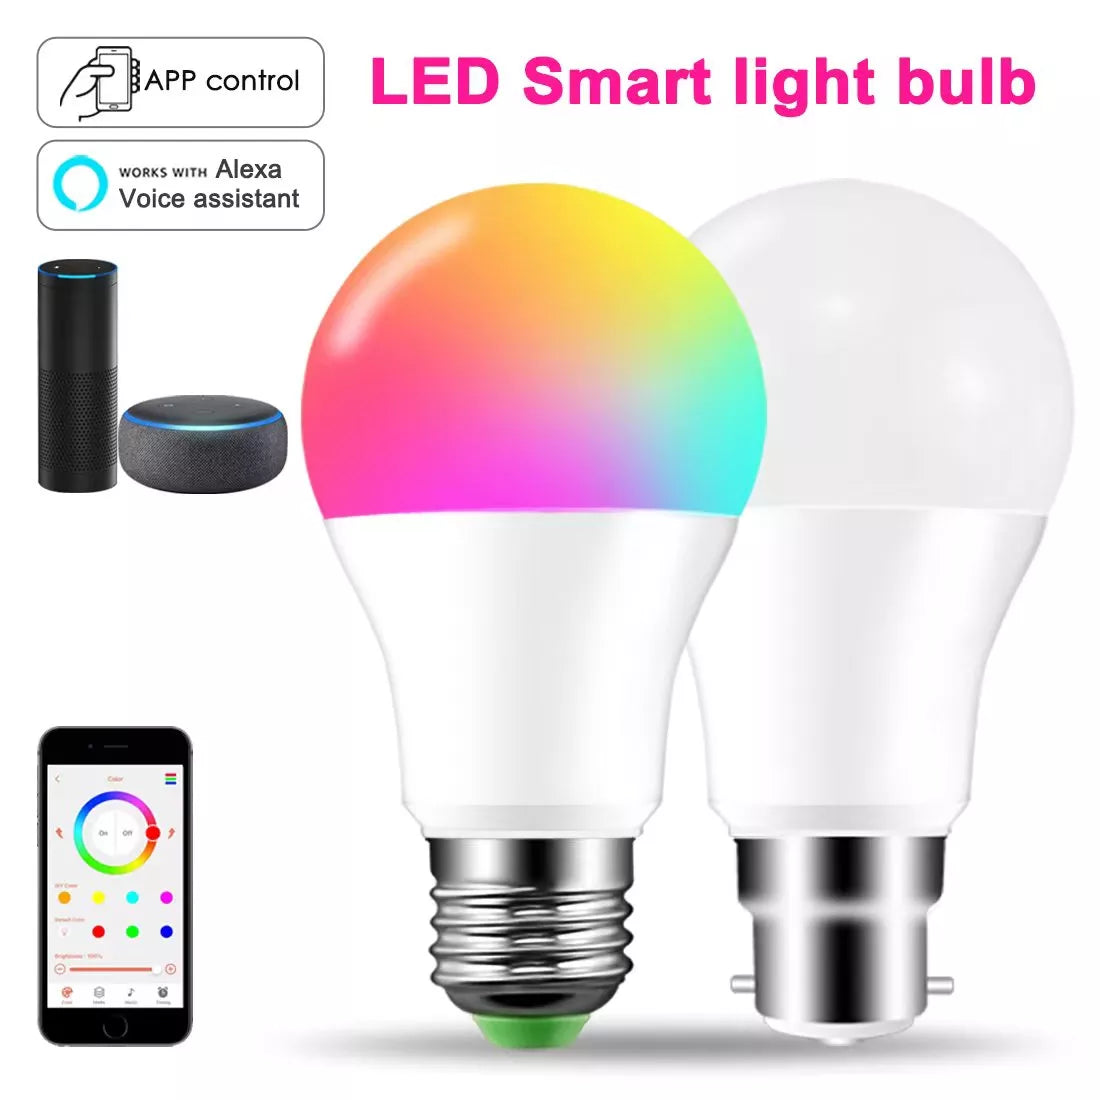 LED Smart Light Bulb, Color Changing Alexa Light, RGB Smart Lamp That Work With Alexa, E27 B22 Base,16 Million Colors, Dimmable